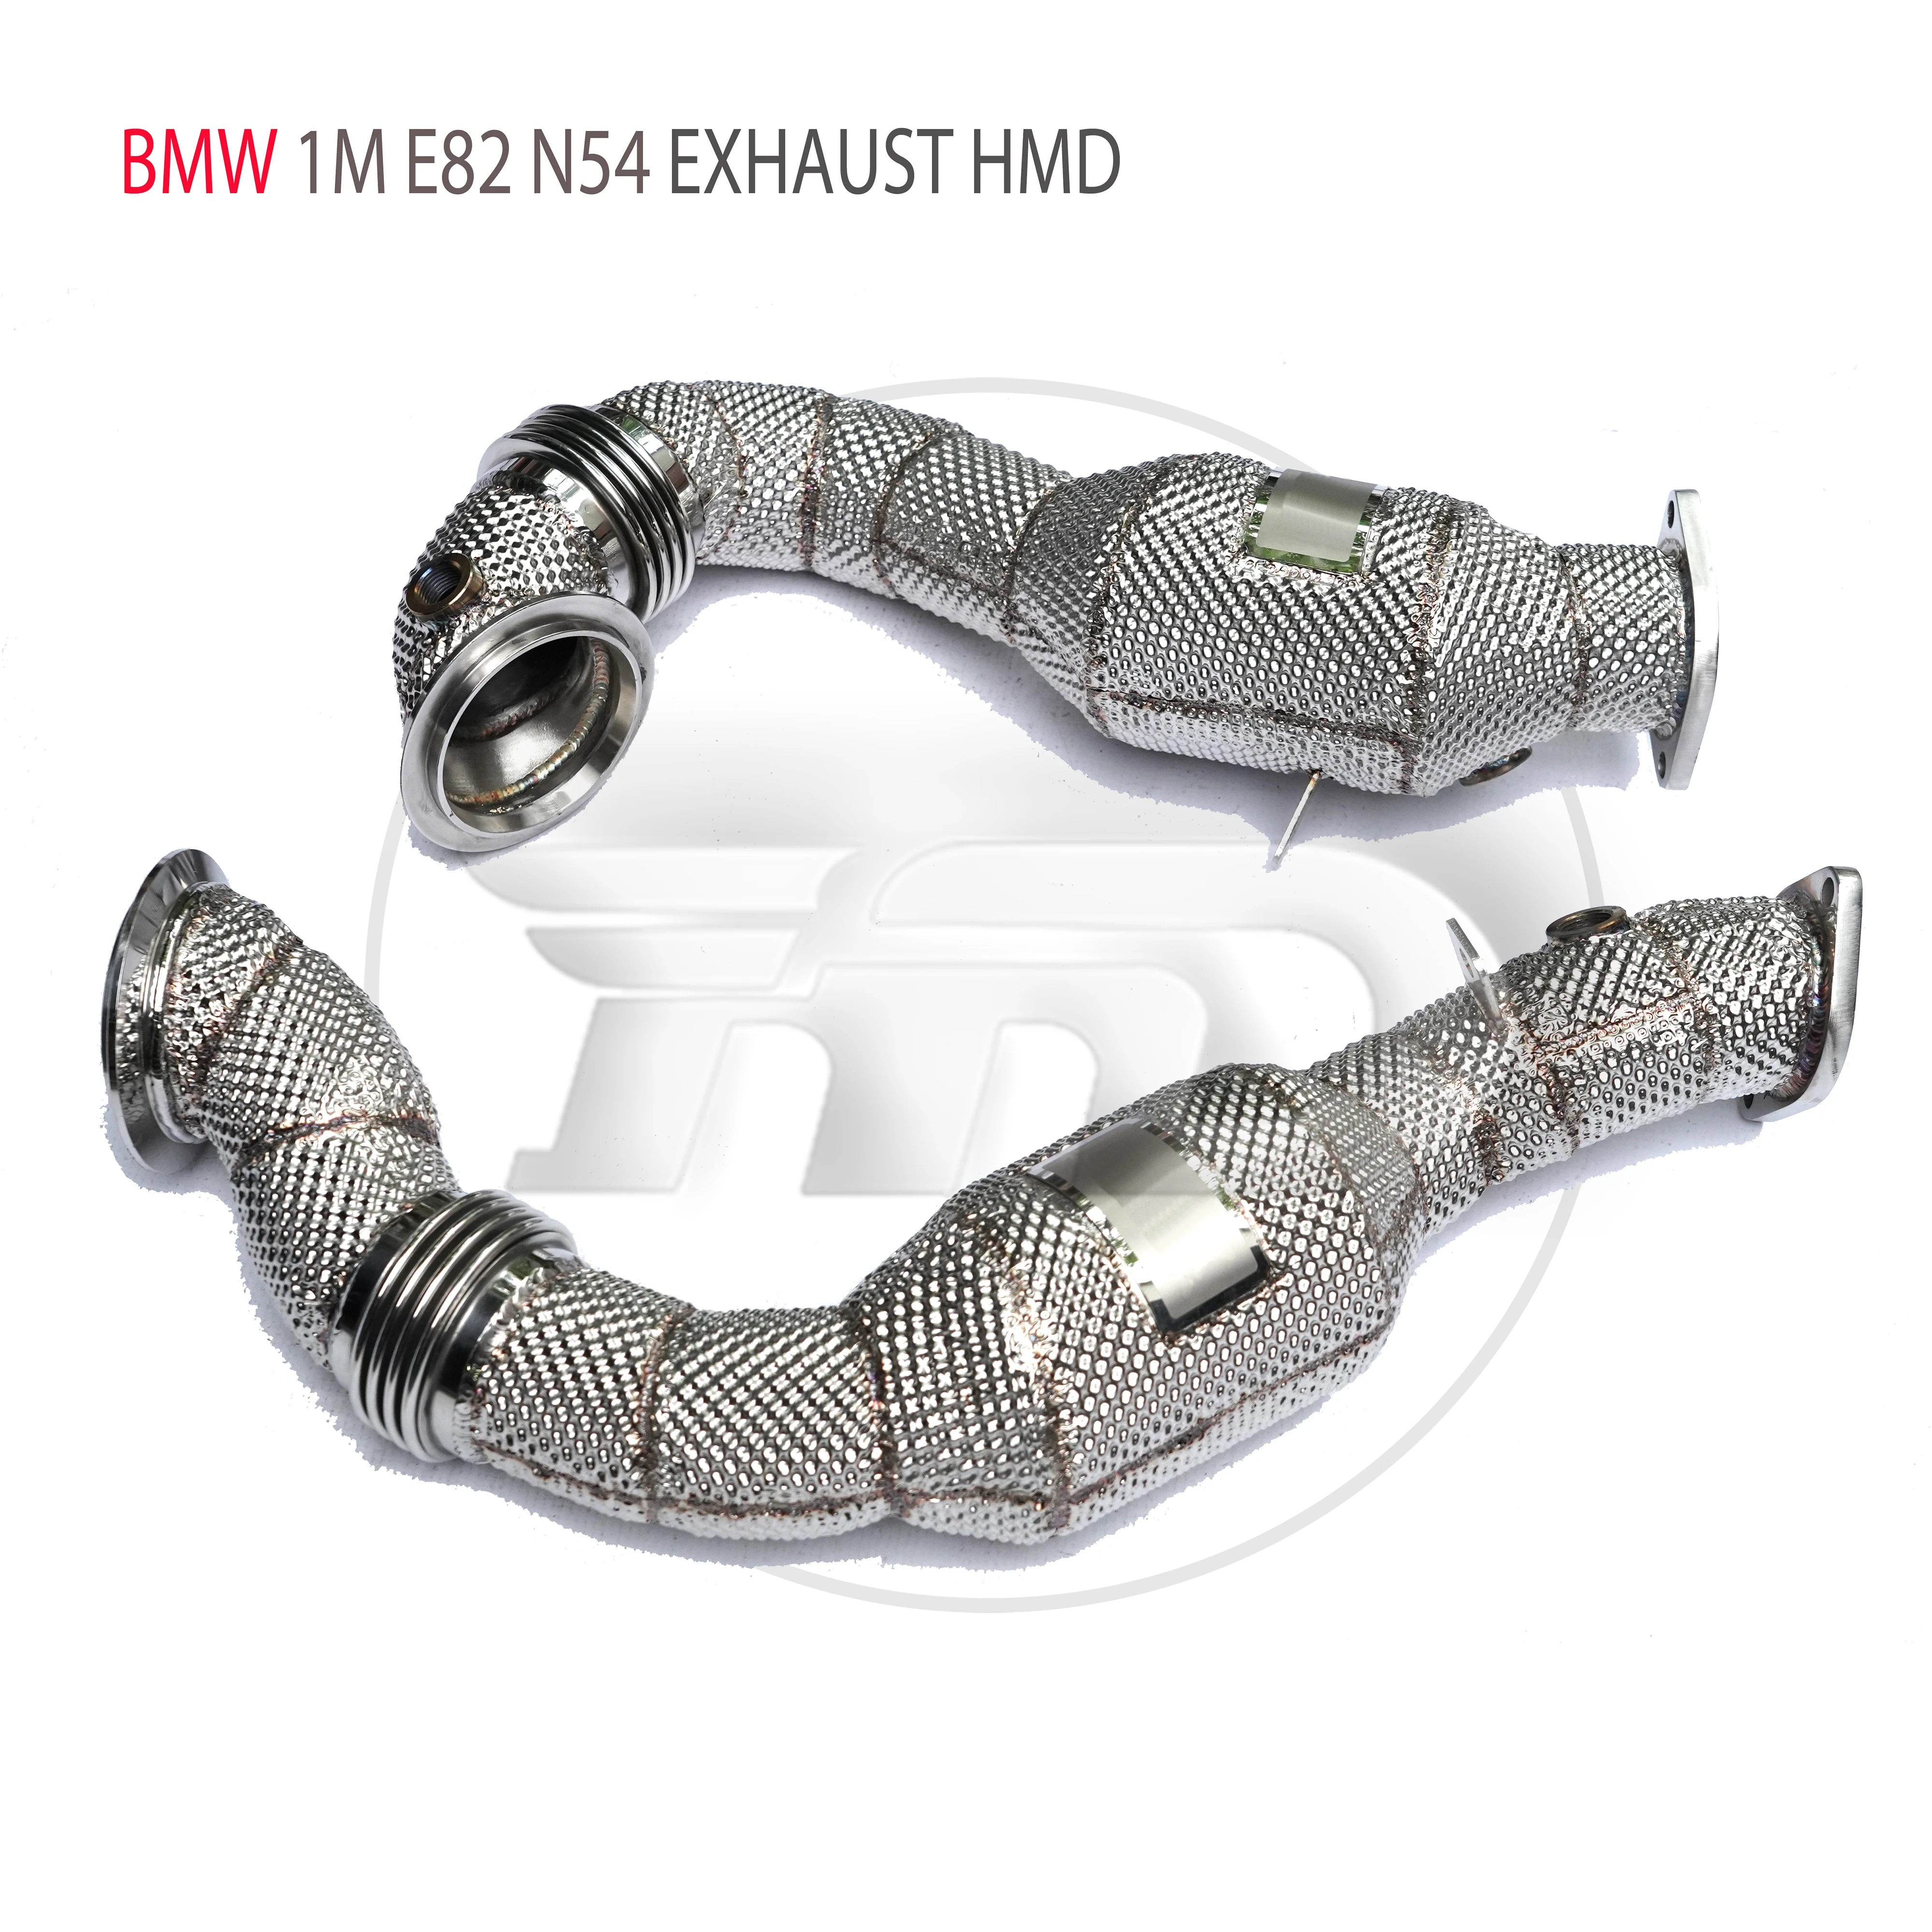 

HMD Exhaust System High Flow Performance Downpipe for BMW 1M E82 N54 Car Accessories With Catalytic Converter